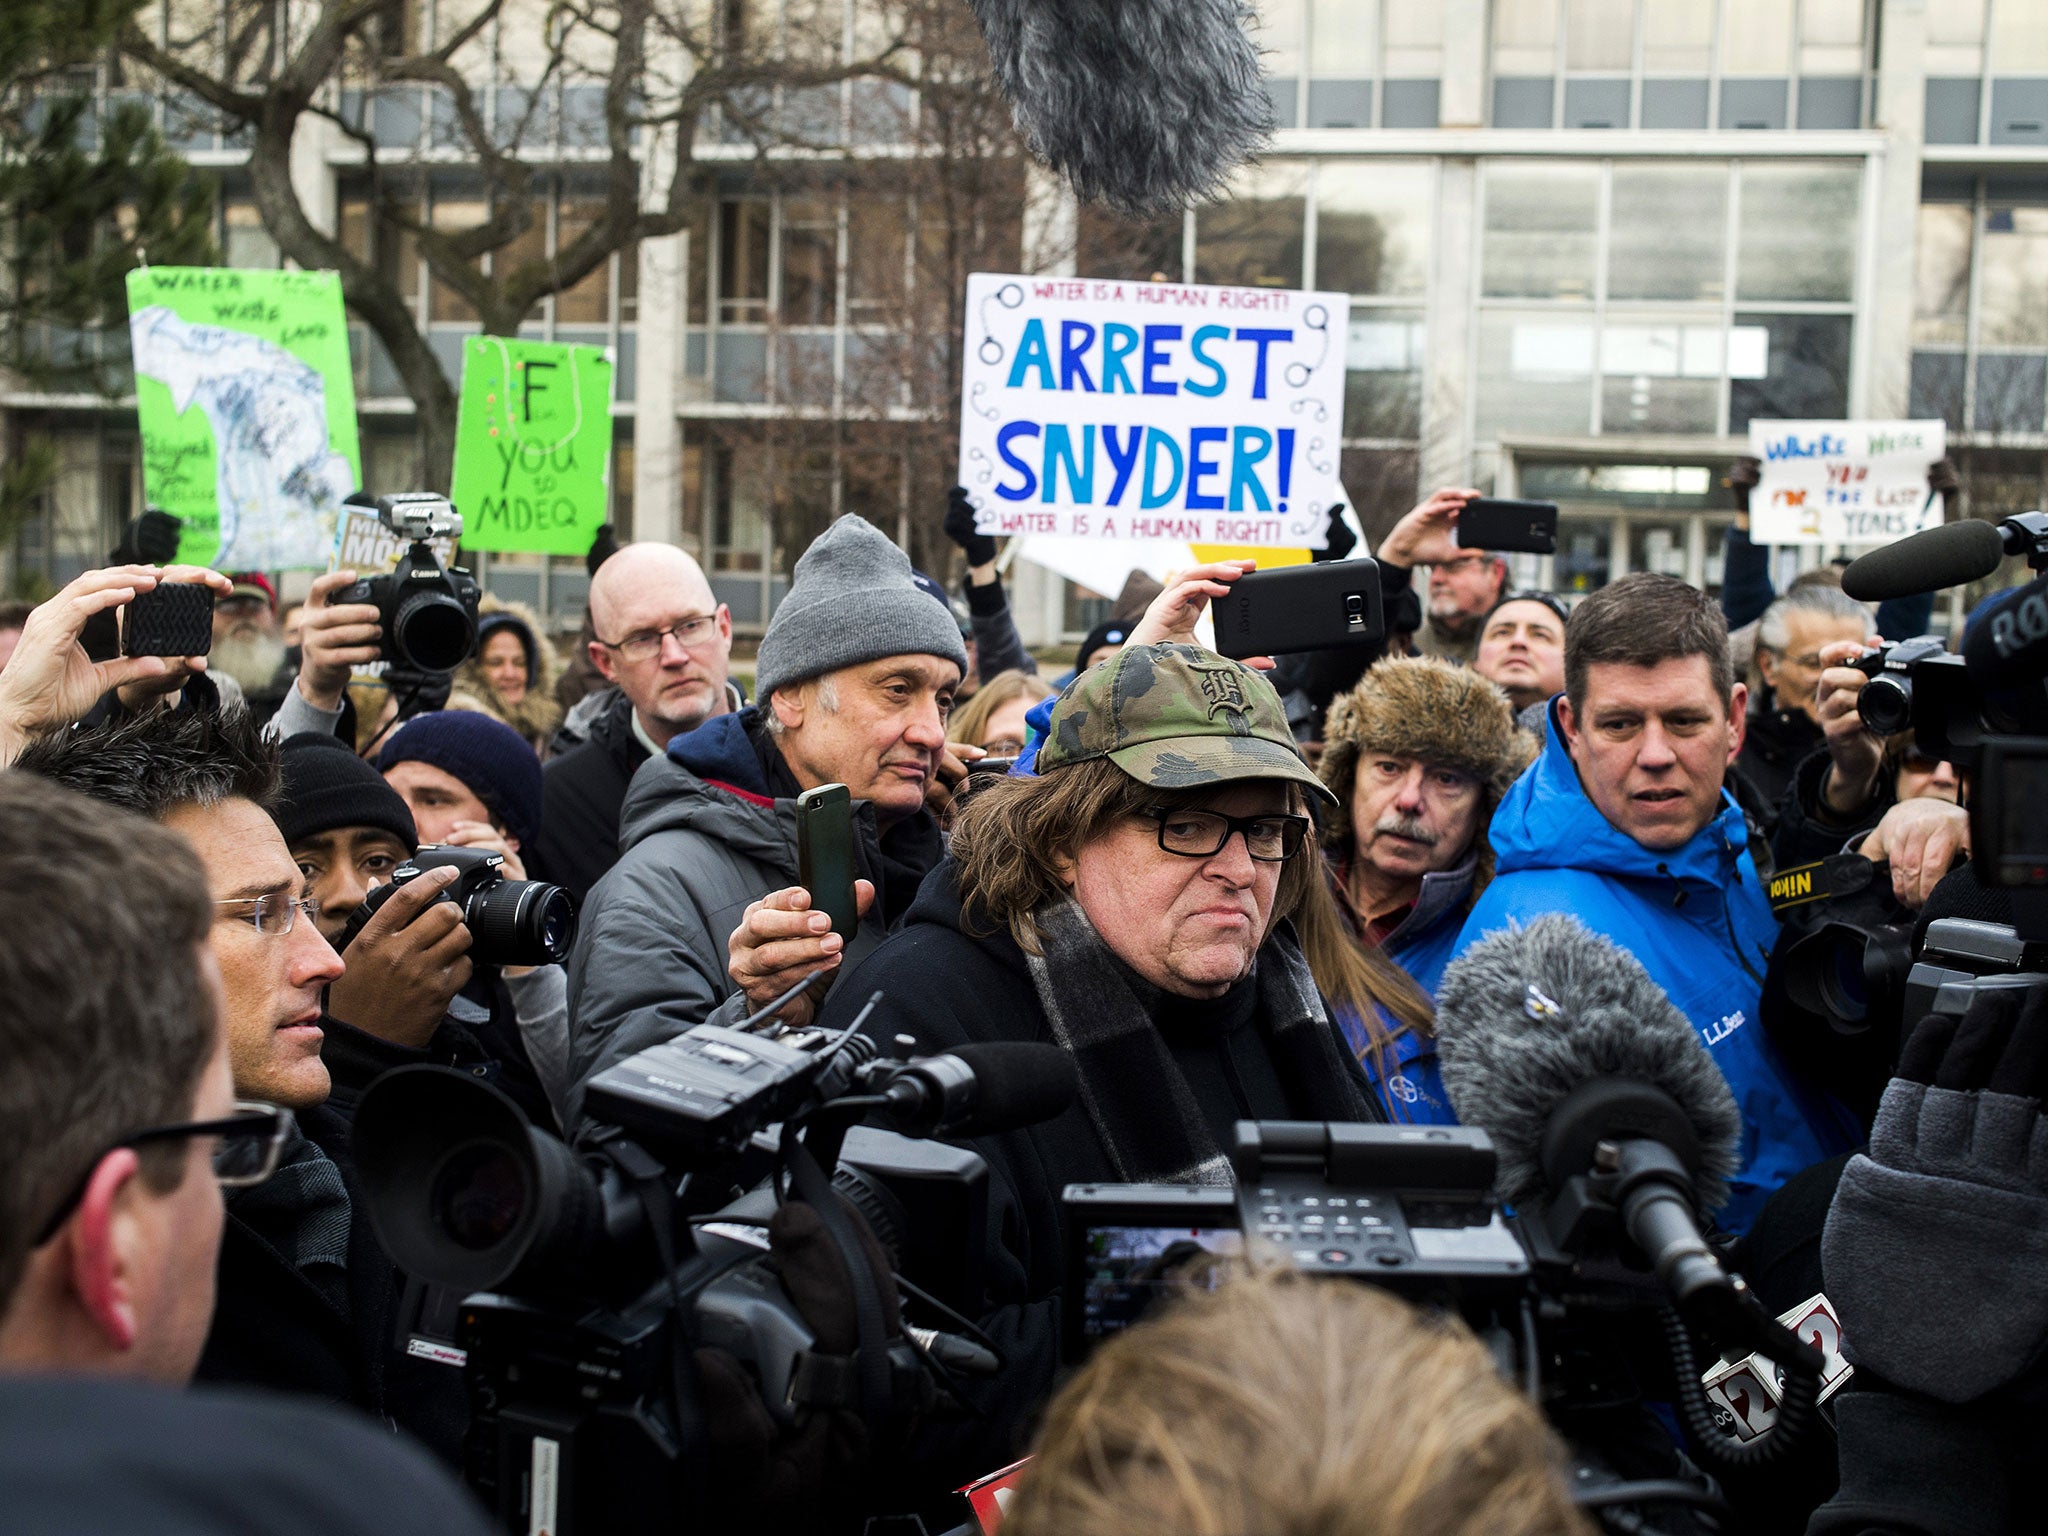 Michael Moore, centre, is part of a movement calling for the arrest of Michigan’s Governor